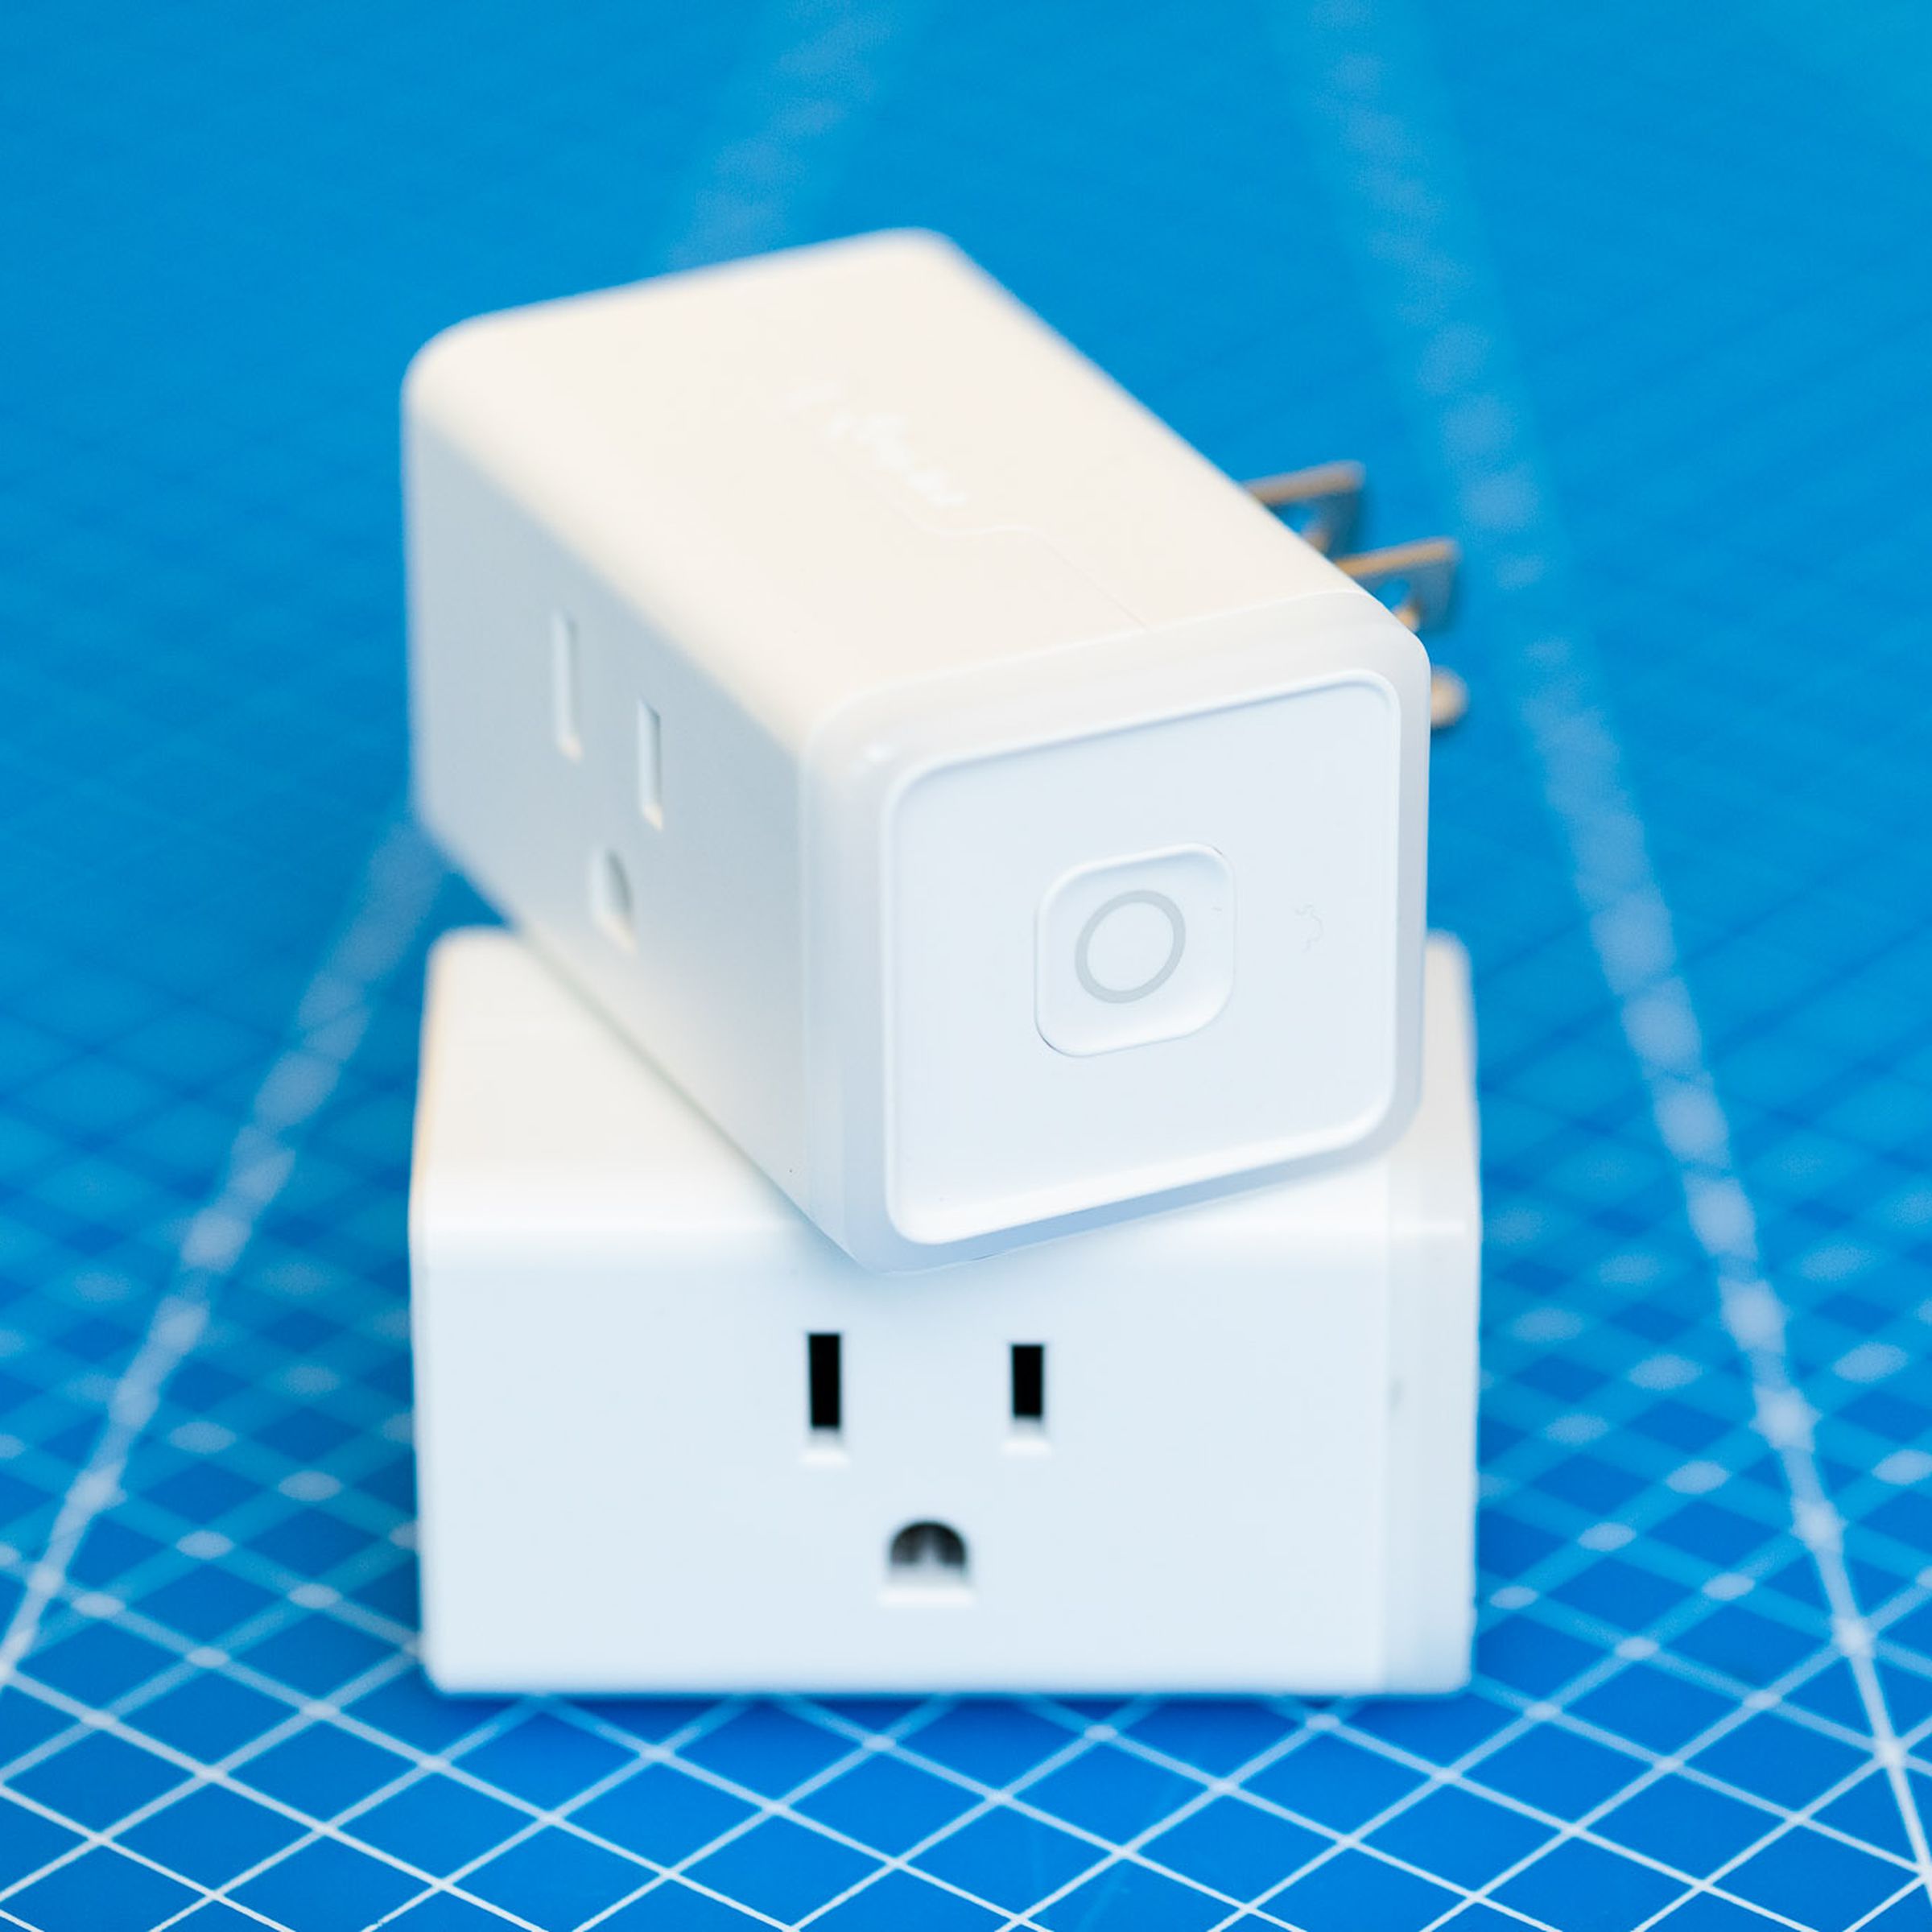 Two TP-Link Kasa KP125M Matter smart plugs stacked on top of each other. They are white rectangular prisms with a three-prong outlet on the front face and three-prong plug on the rear face, TP-Link on the top face, and a power button on the right face. 